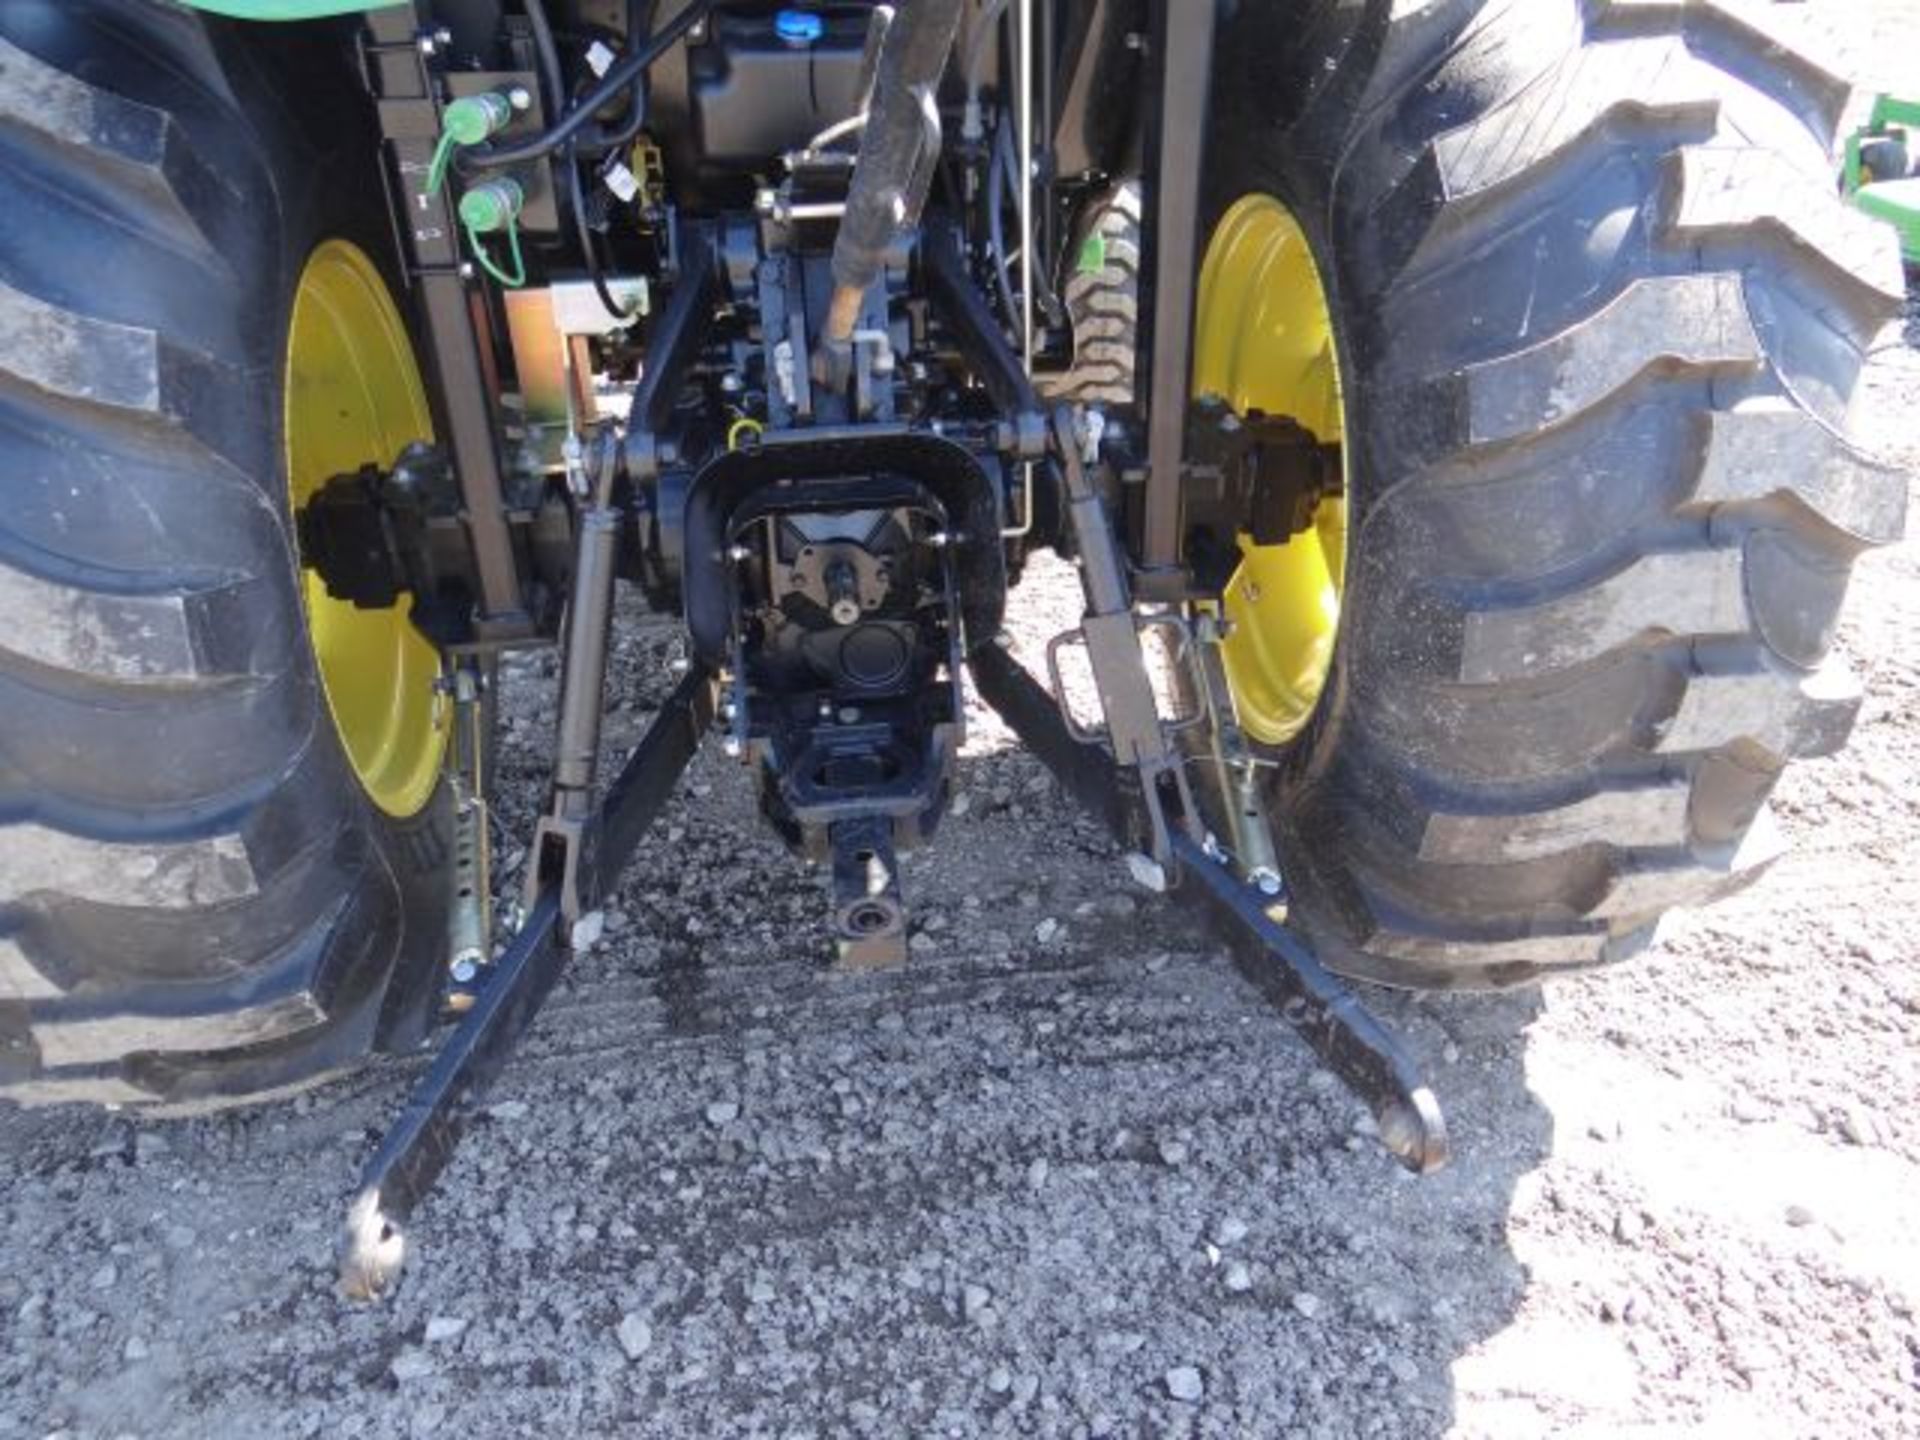 2013 JD 4520 Compact Tractor 90 hrs, 60hp, MFWD, 3sp Hydro, CAH, AM/FM, E-Hydro, 540 & 540E Rear - Image 3 of 4